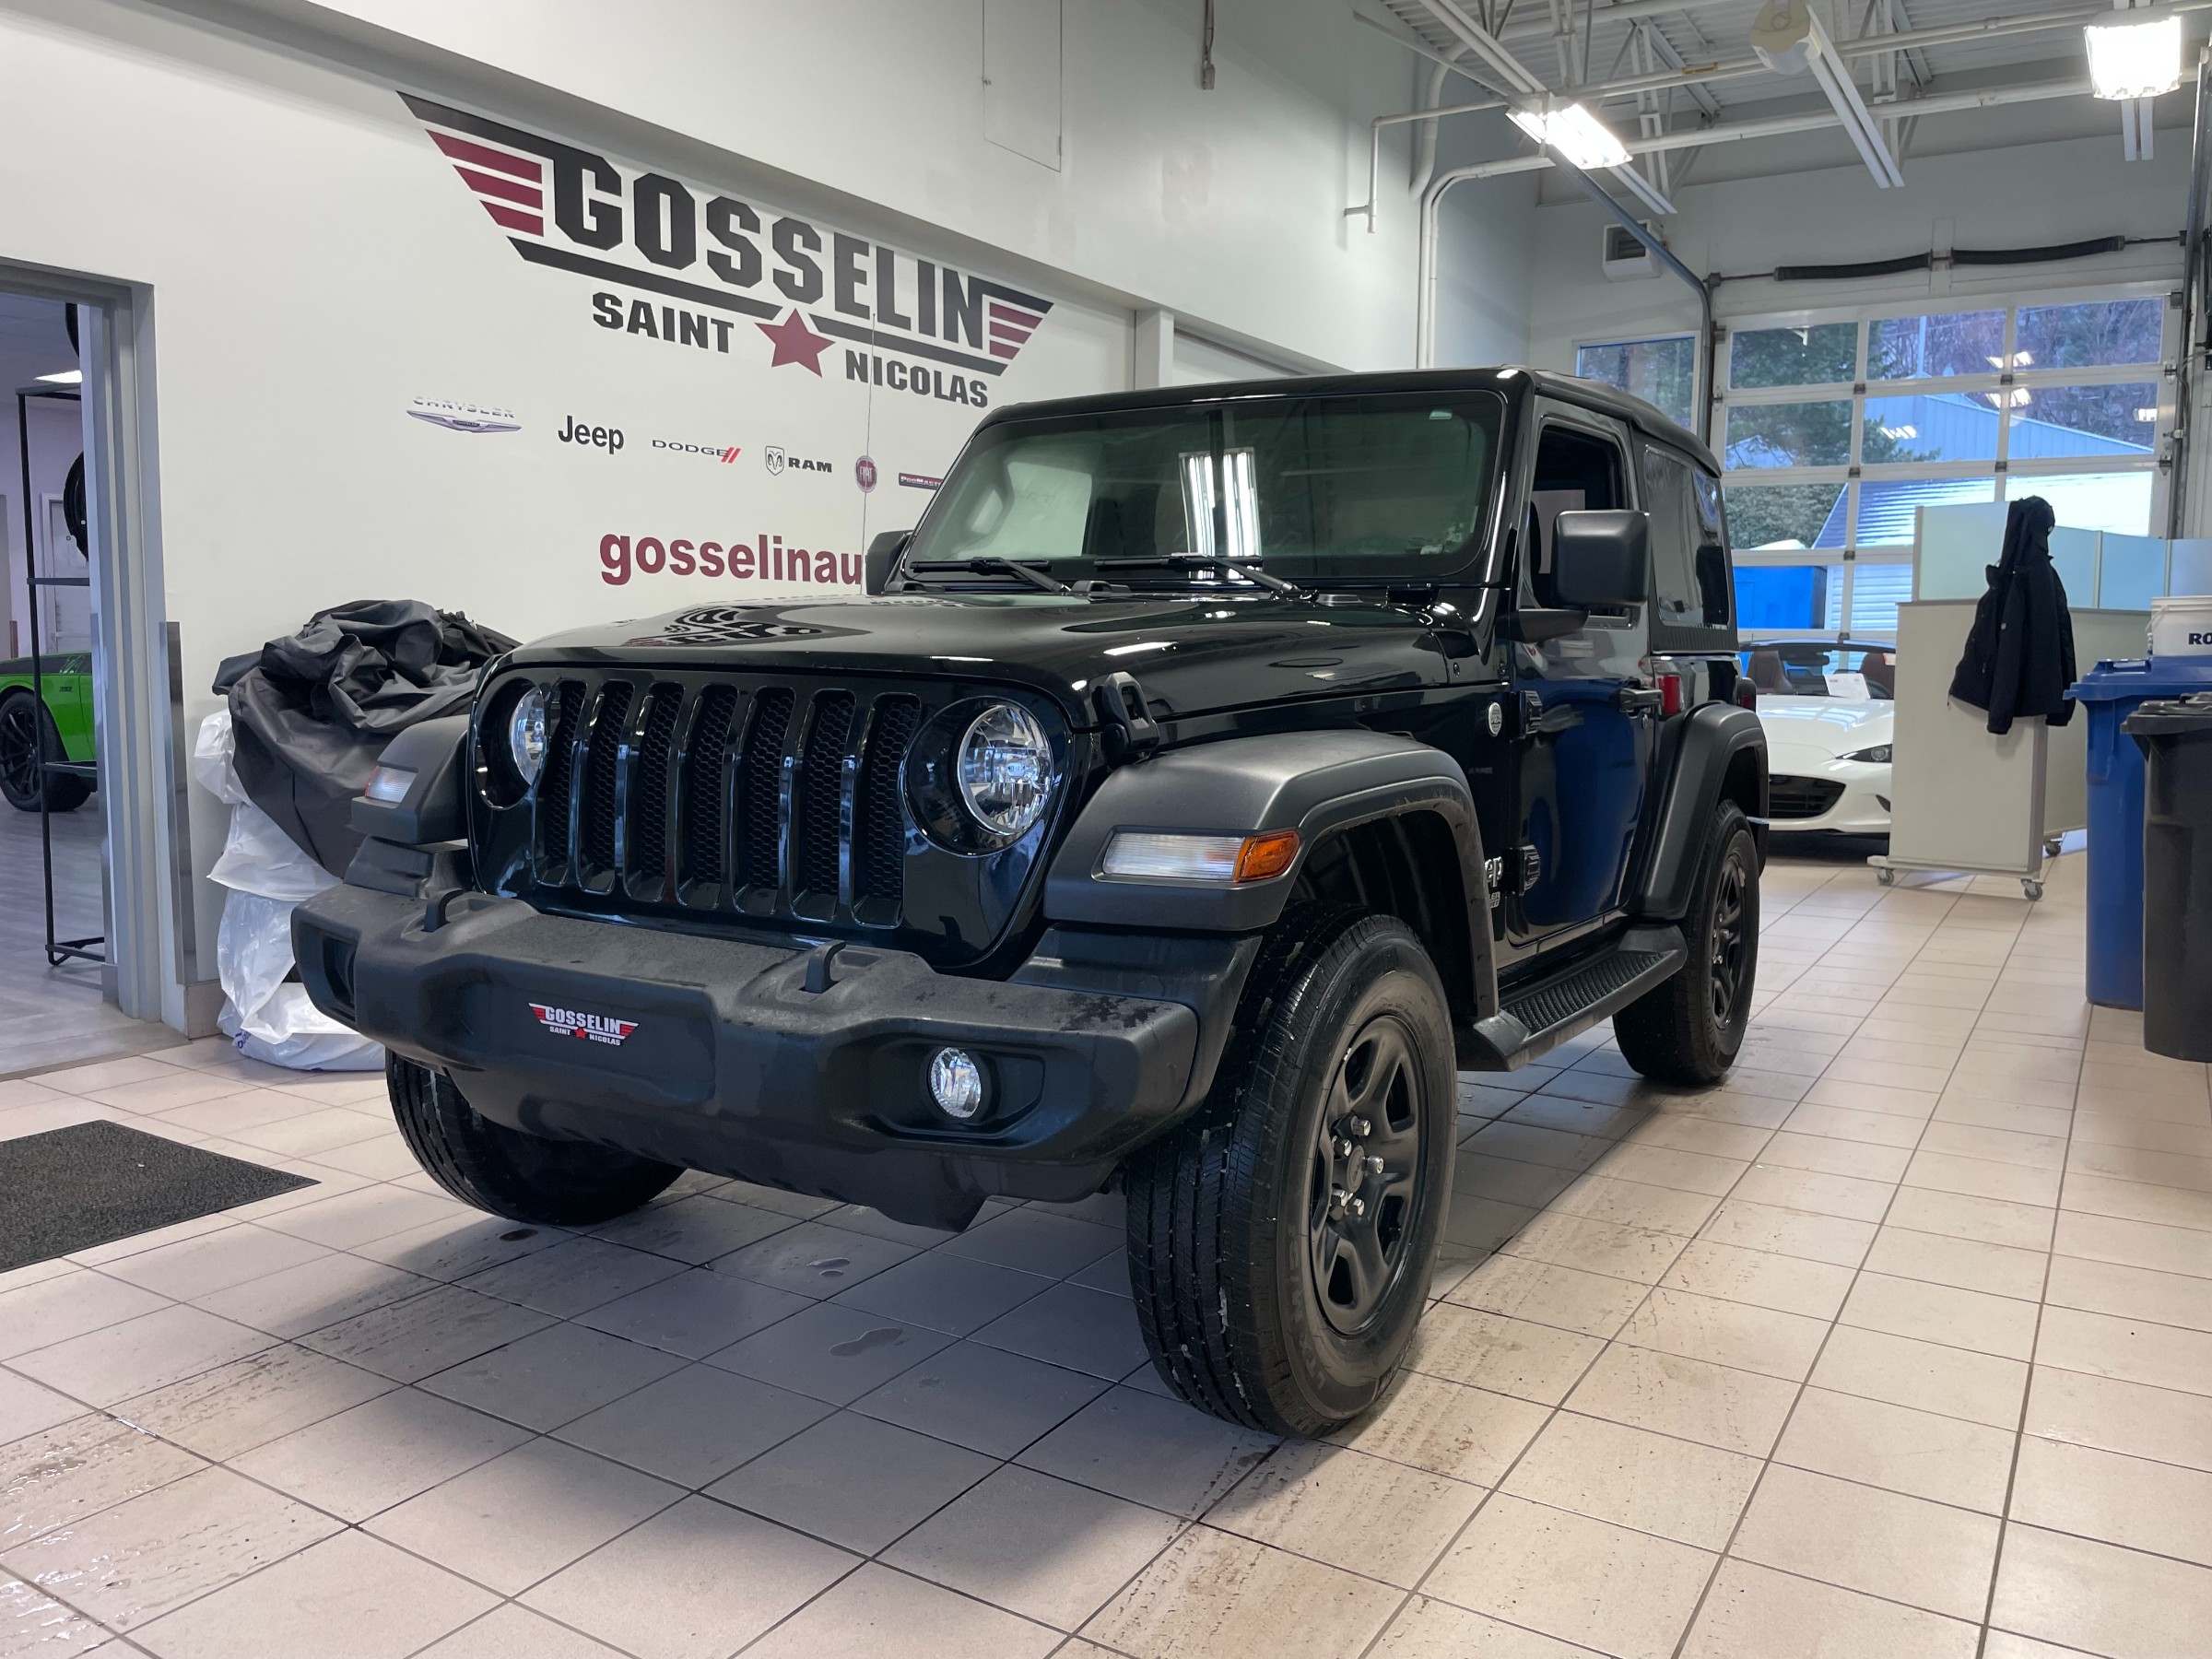 Used 2021 Jeep Wrangler with 7,966 km for sale at Otogo